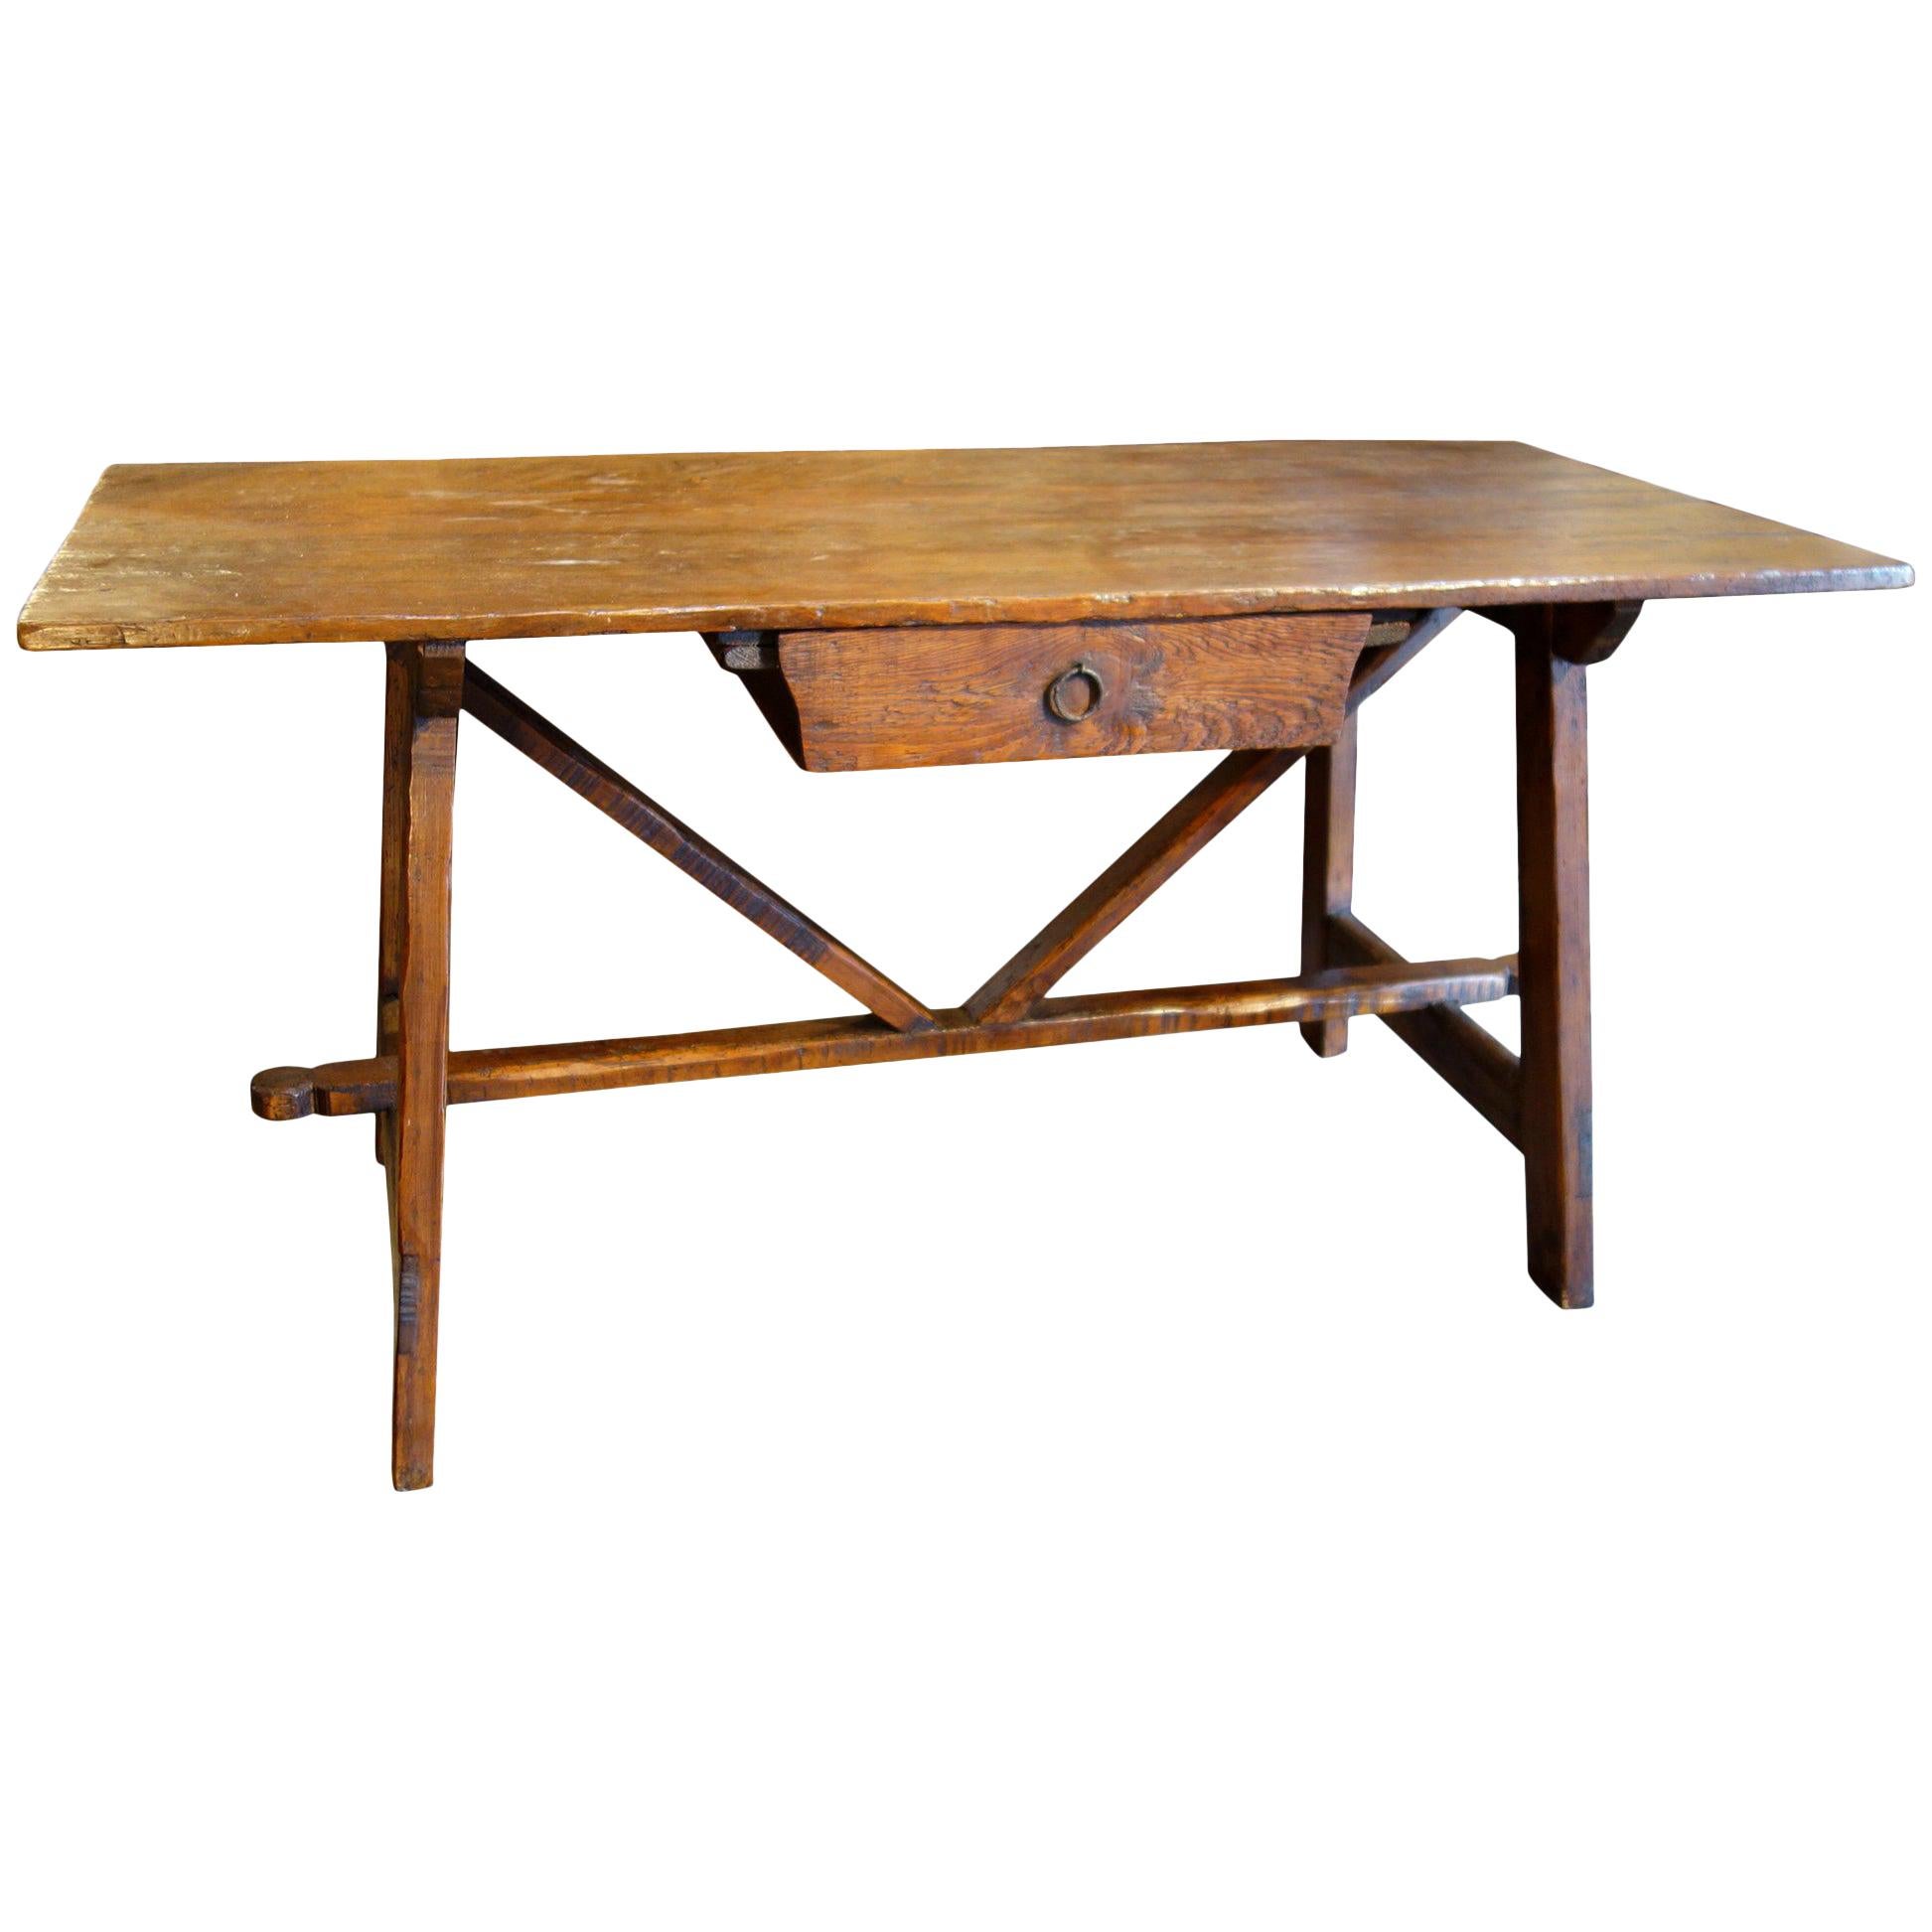 17th C Style Italian Rustic Primitive Handcrafted Farmhouse Table with options For Sale